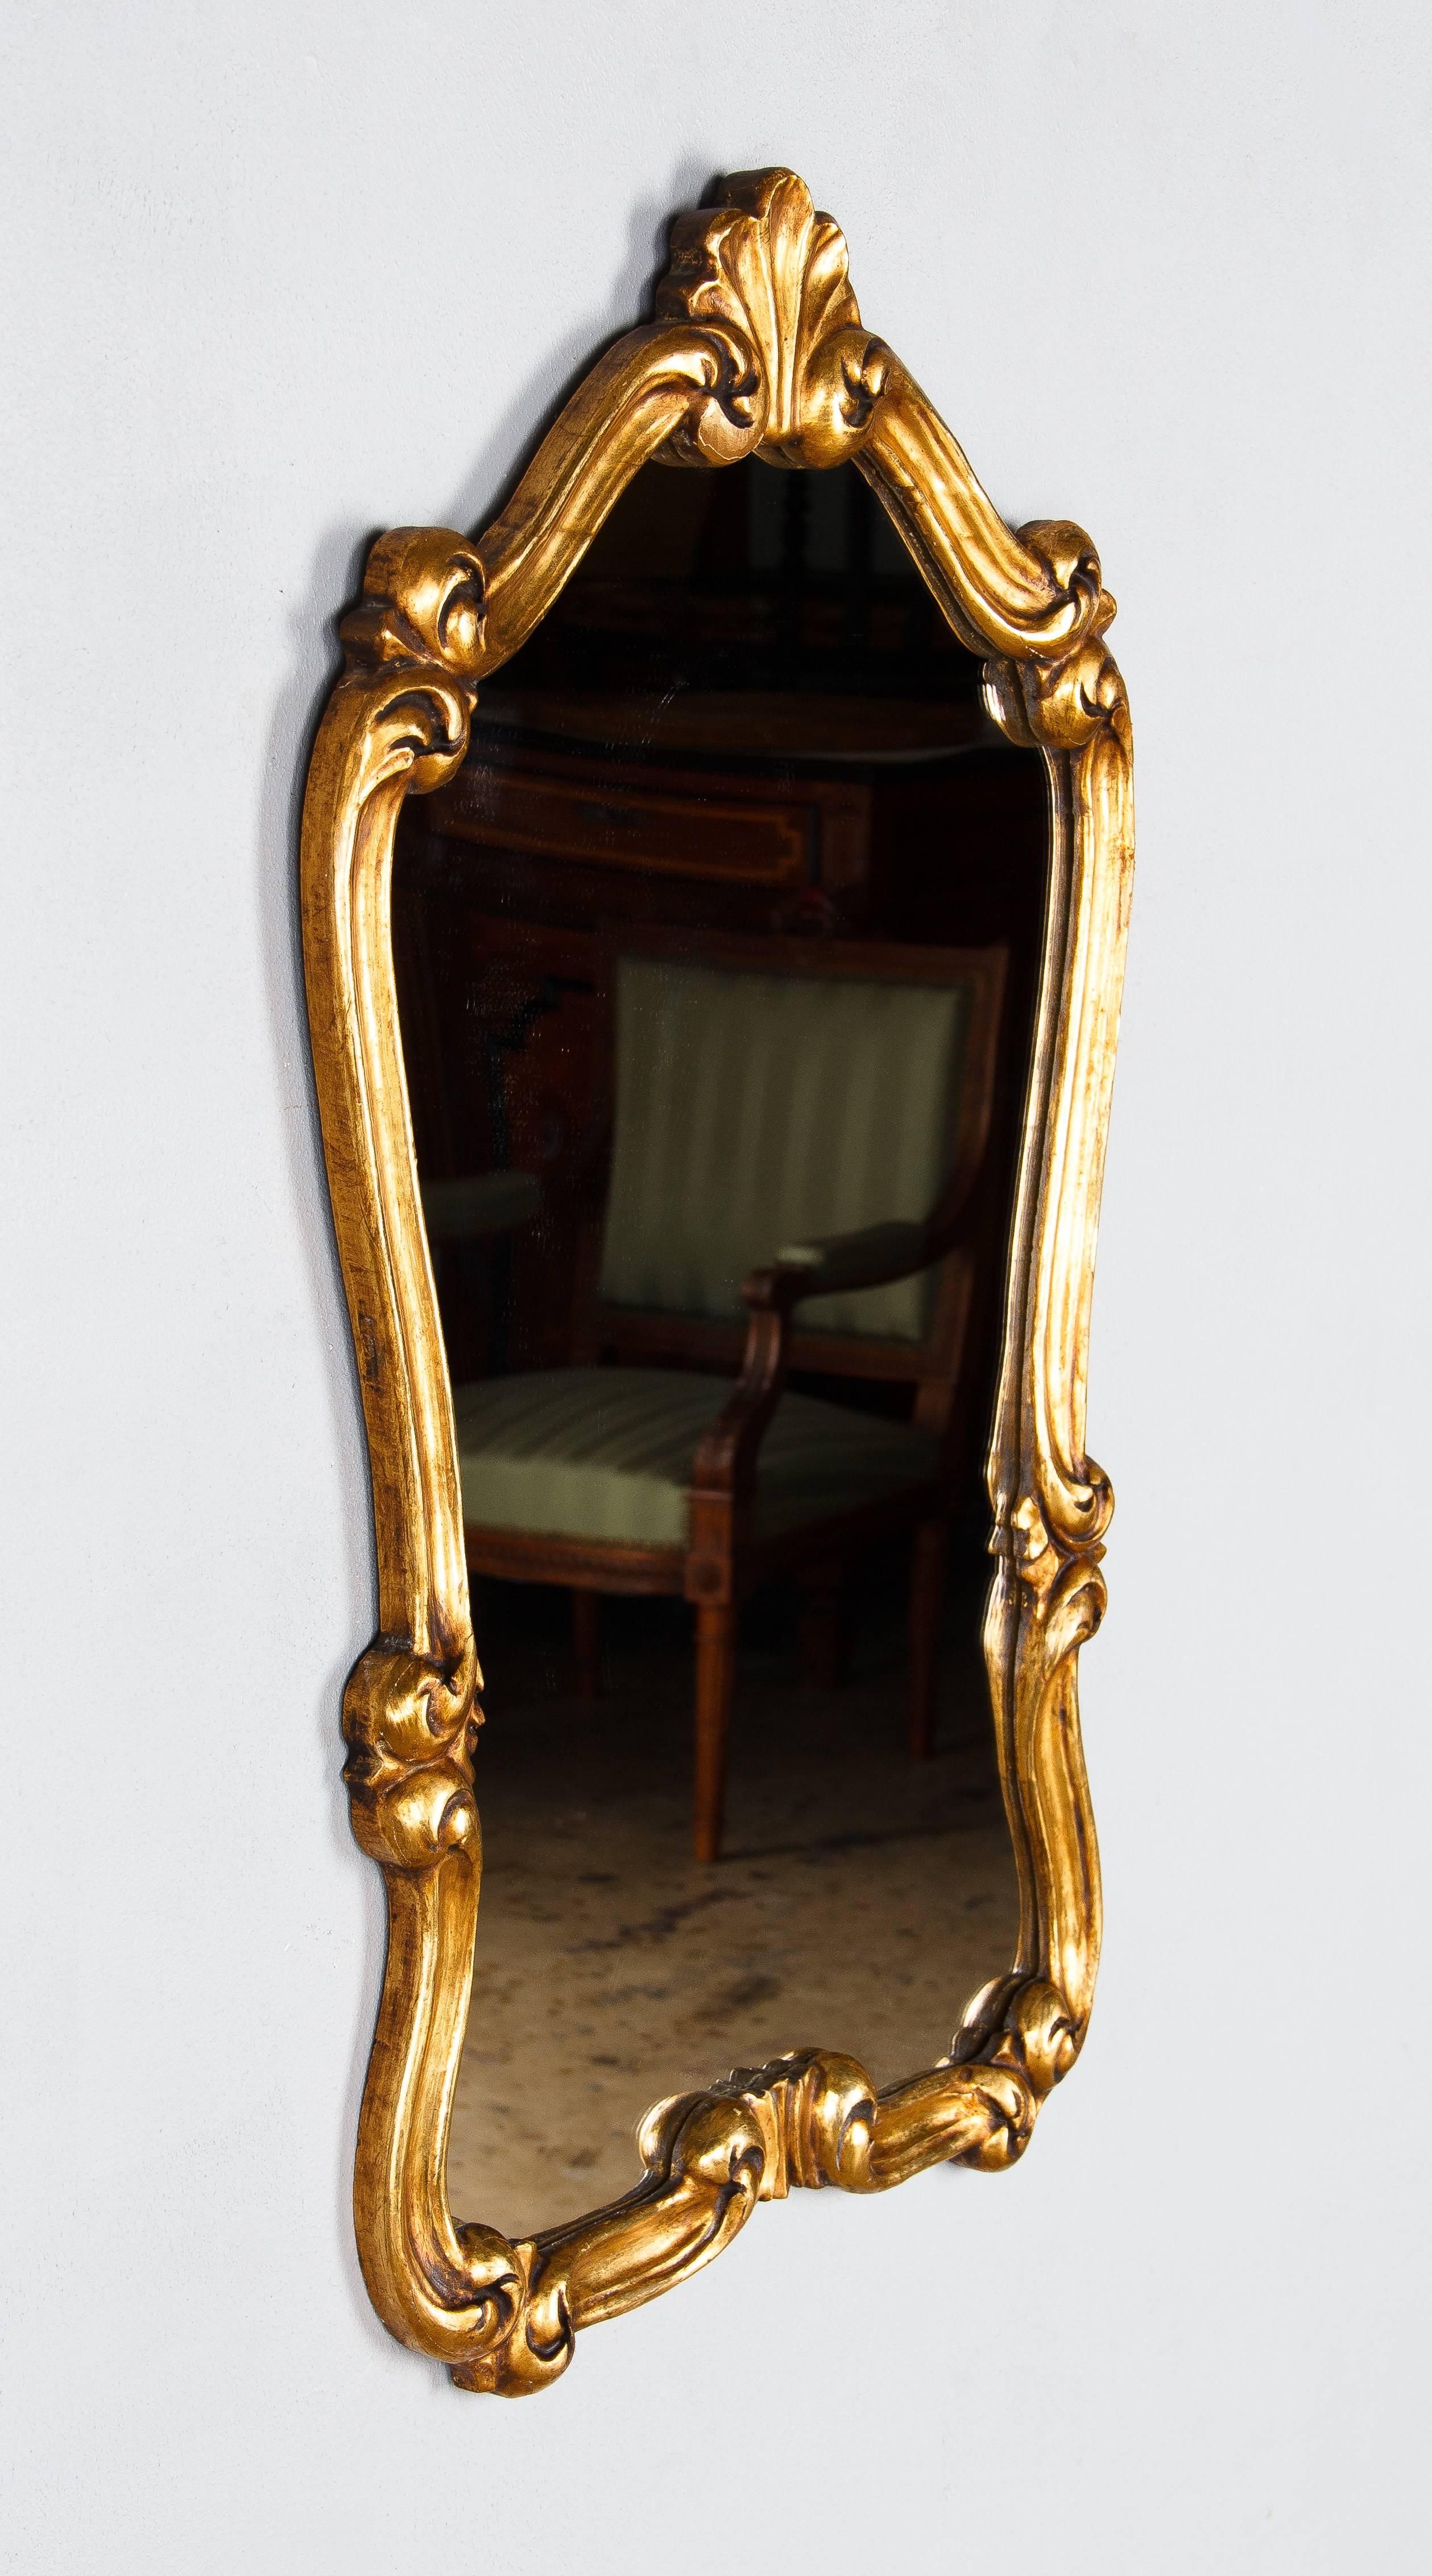 A very elegant gold leaf mirror in the Louis XV style with scrolls and shell motifs. Beautiful patina! The mirrored glass is new.